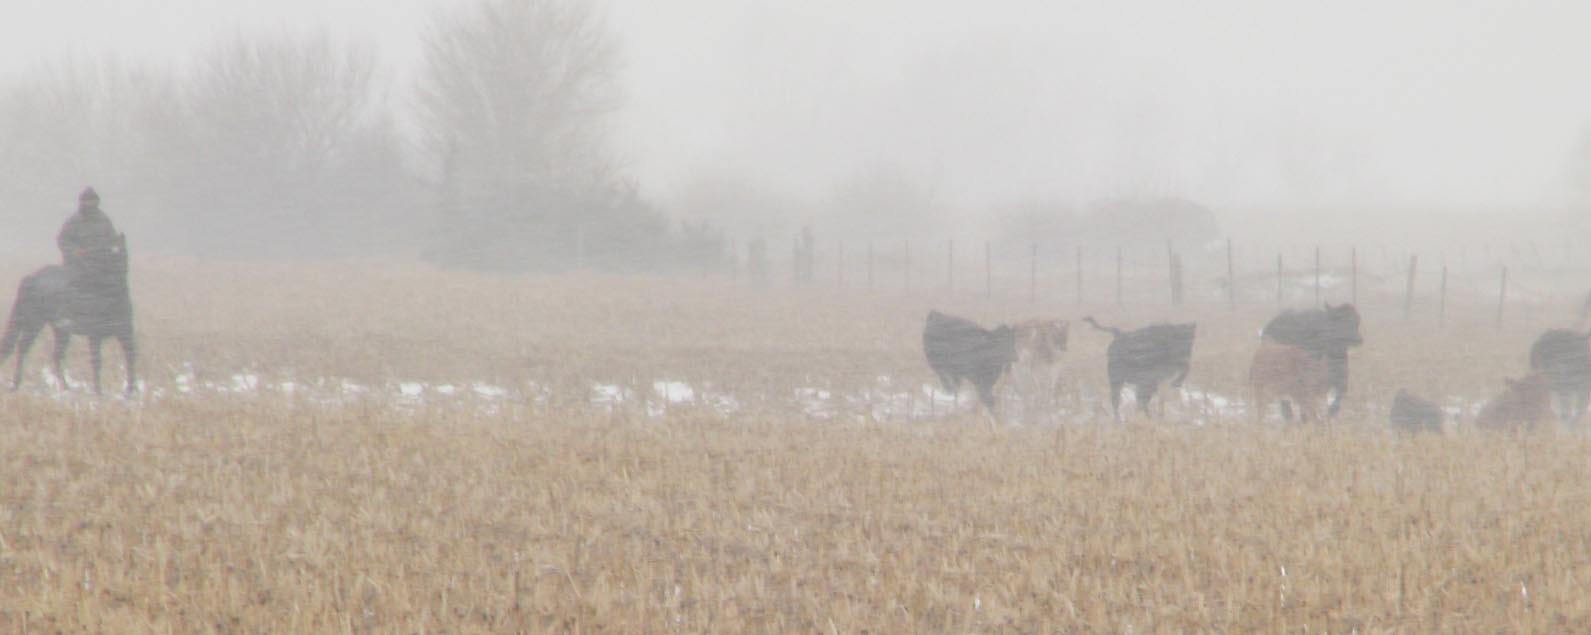 [moving+cattle+in+snow.jpg]